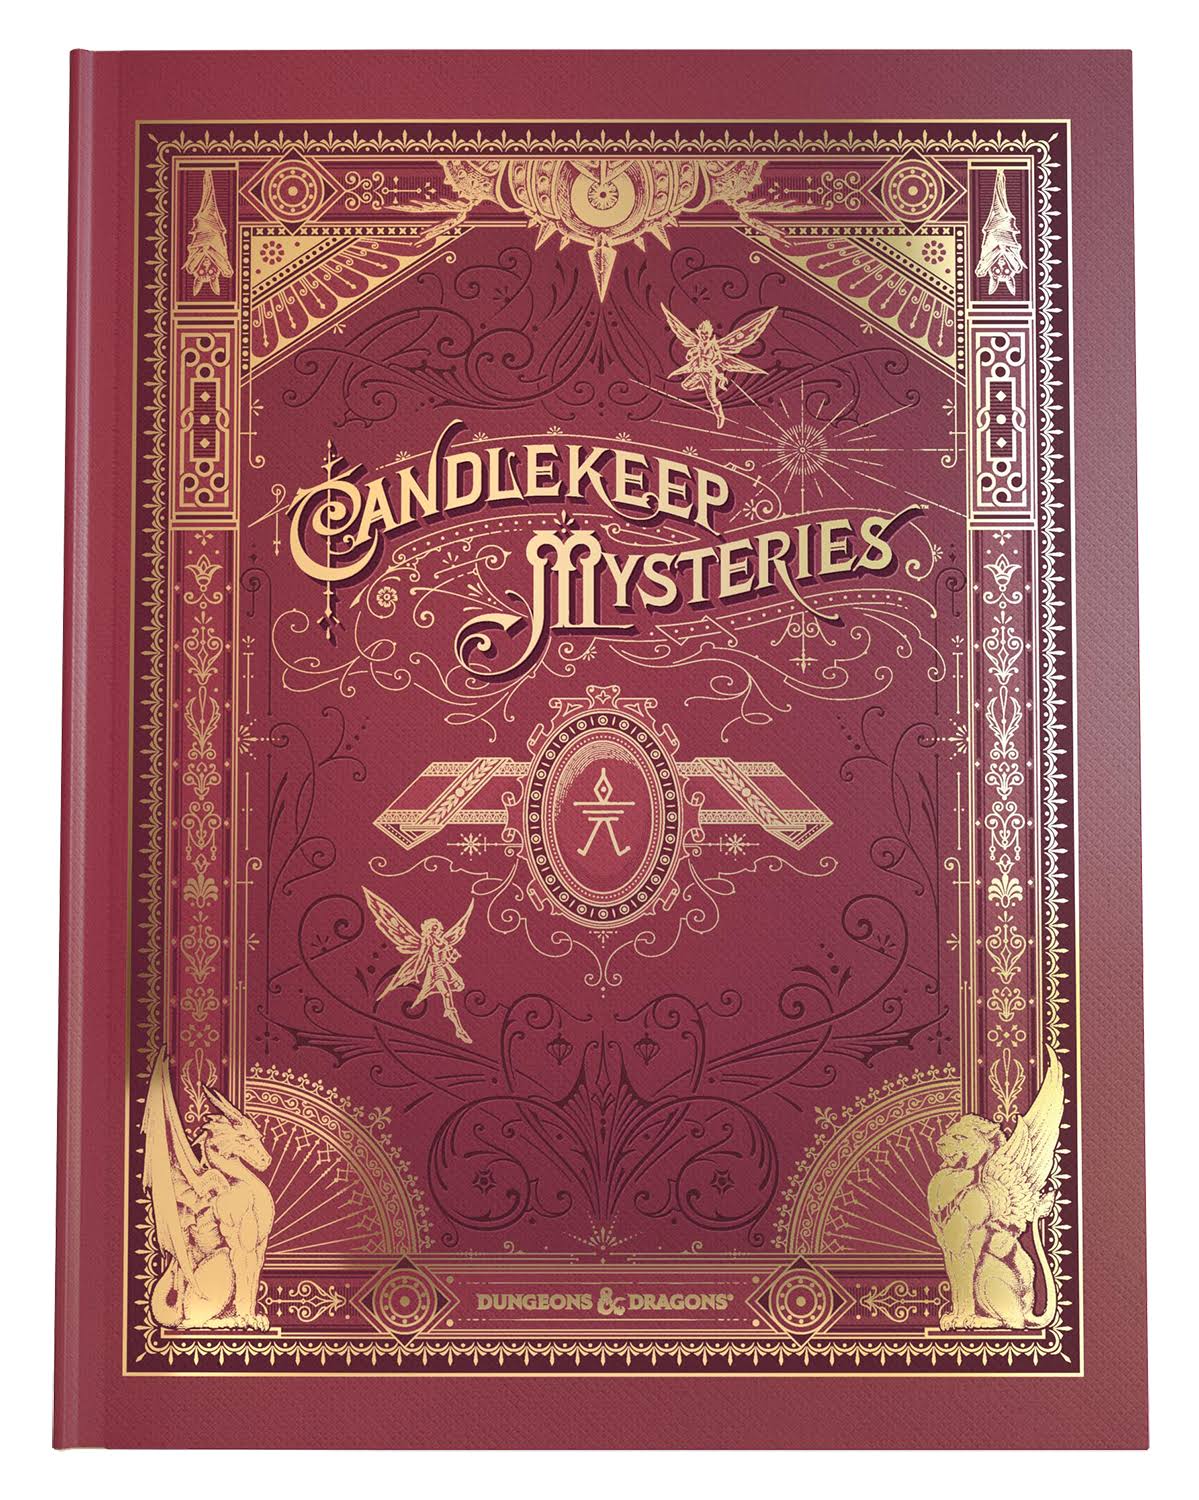 Dungeons & Dragons - Candlekeep Mysteries Alternate Cover